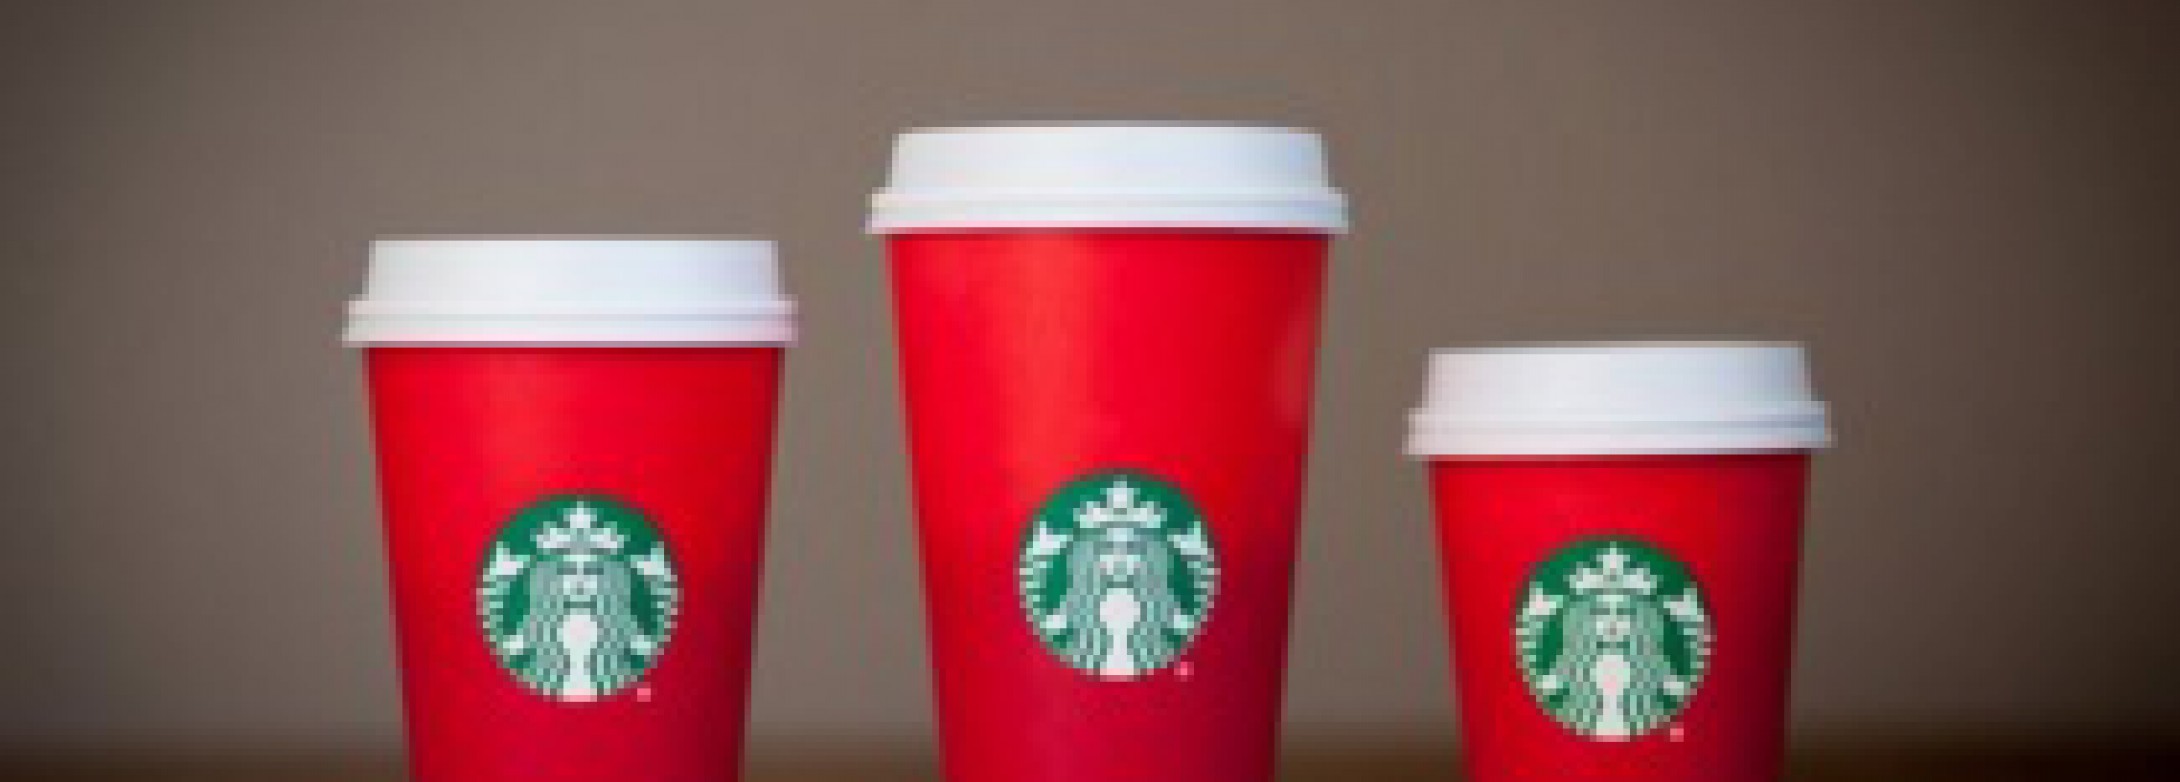 Starbucks Red Cup Controversy? A Publicity Score!